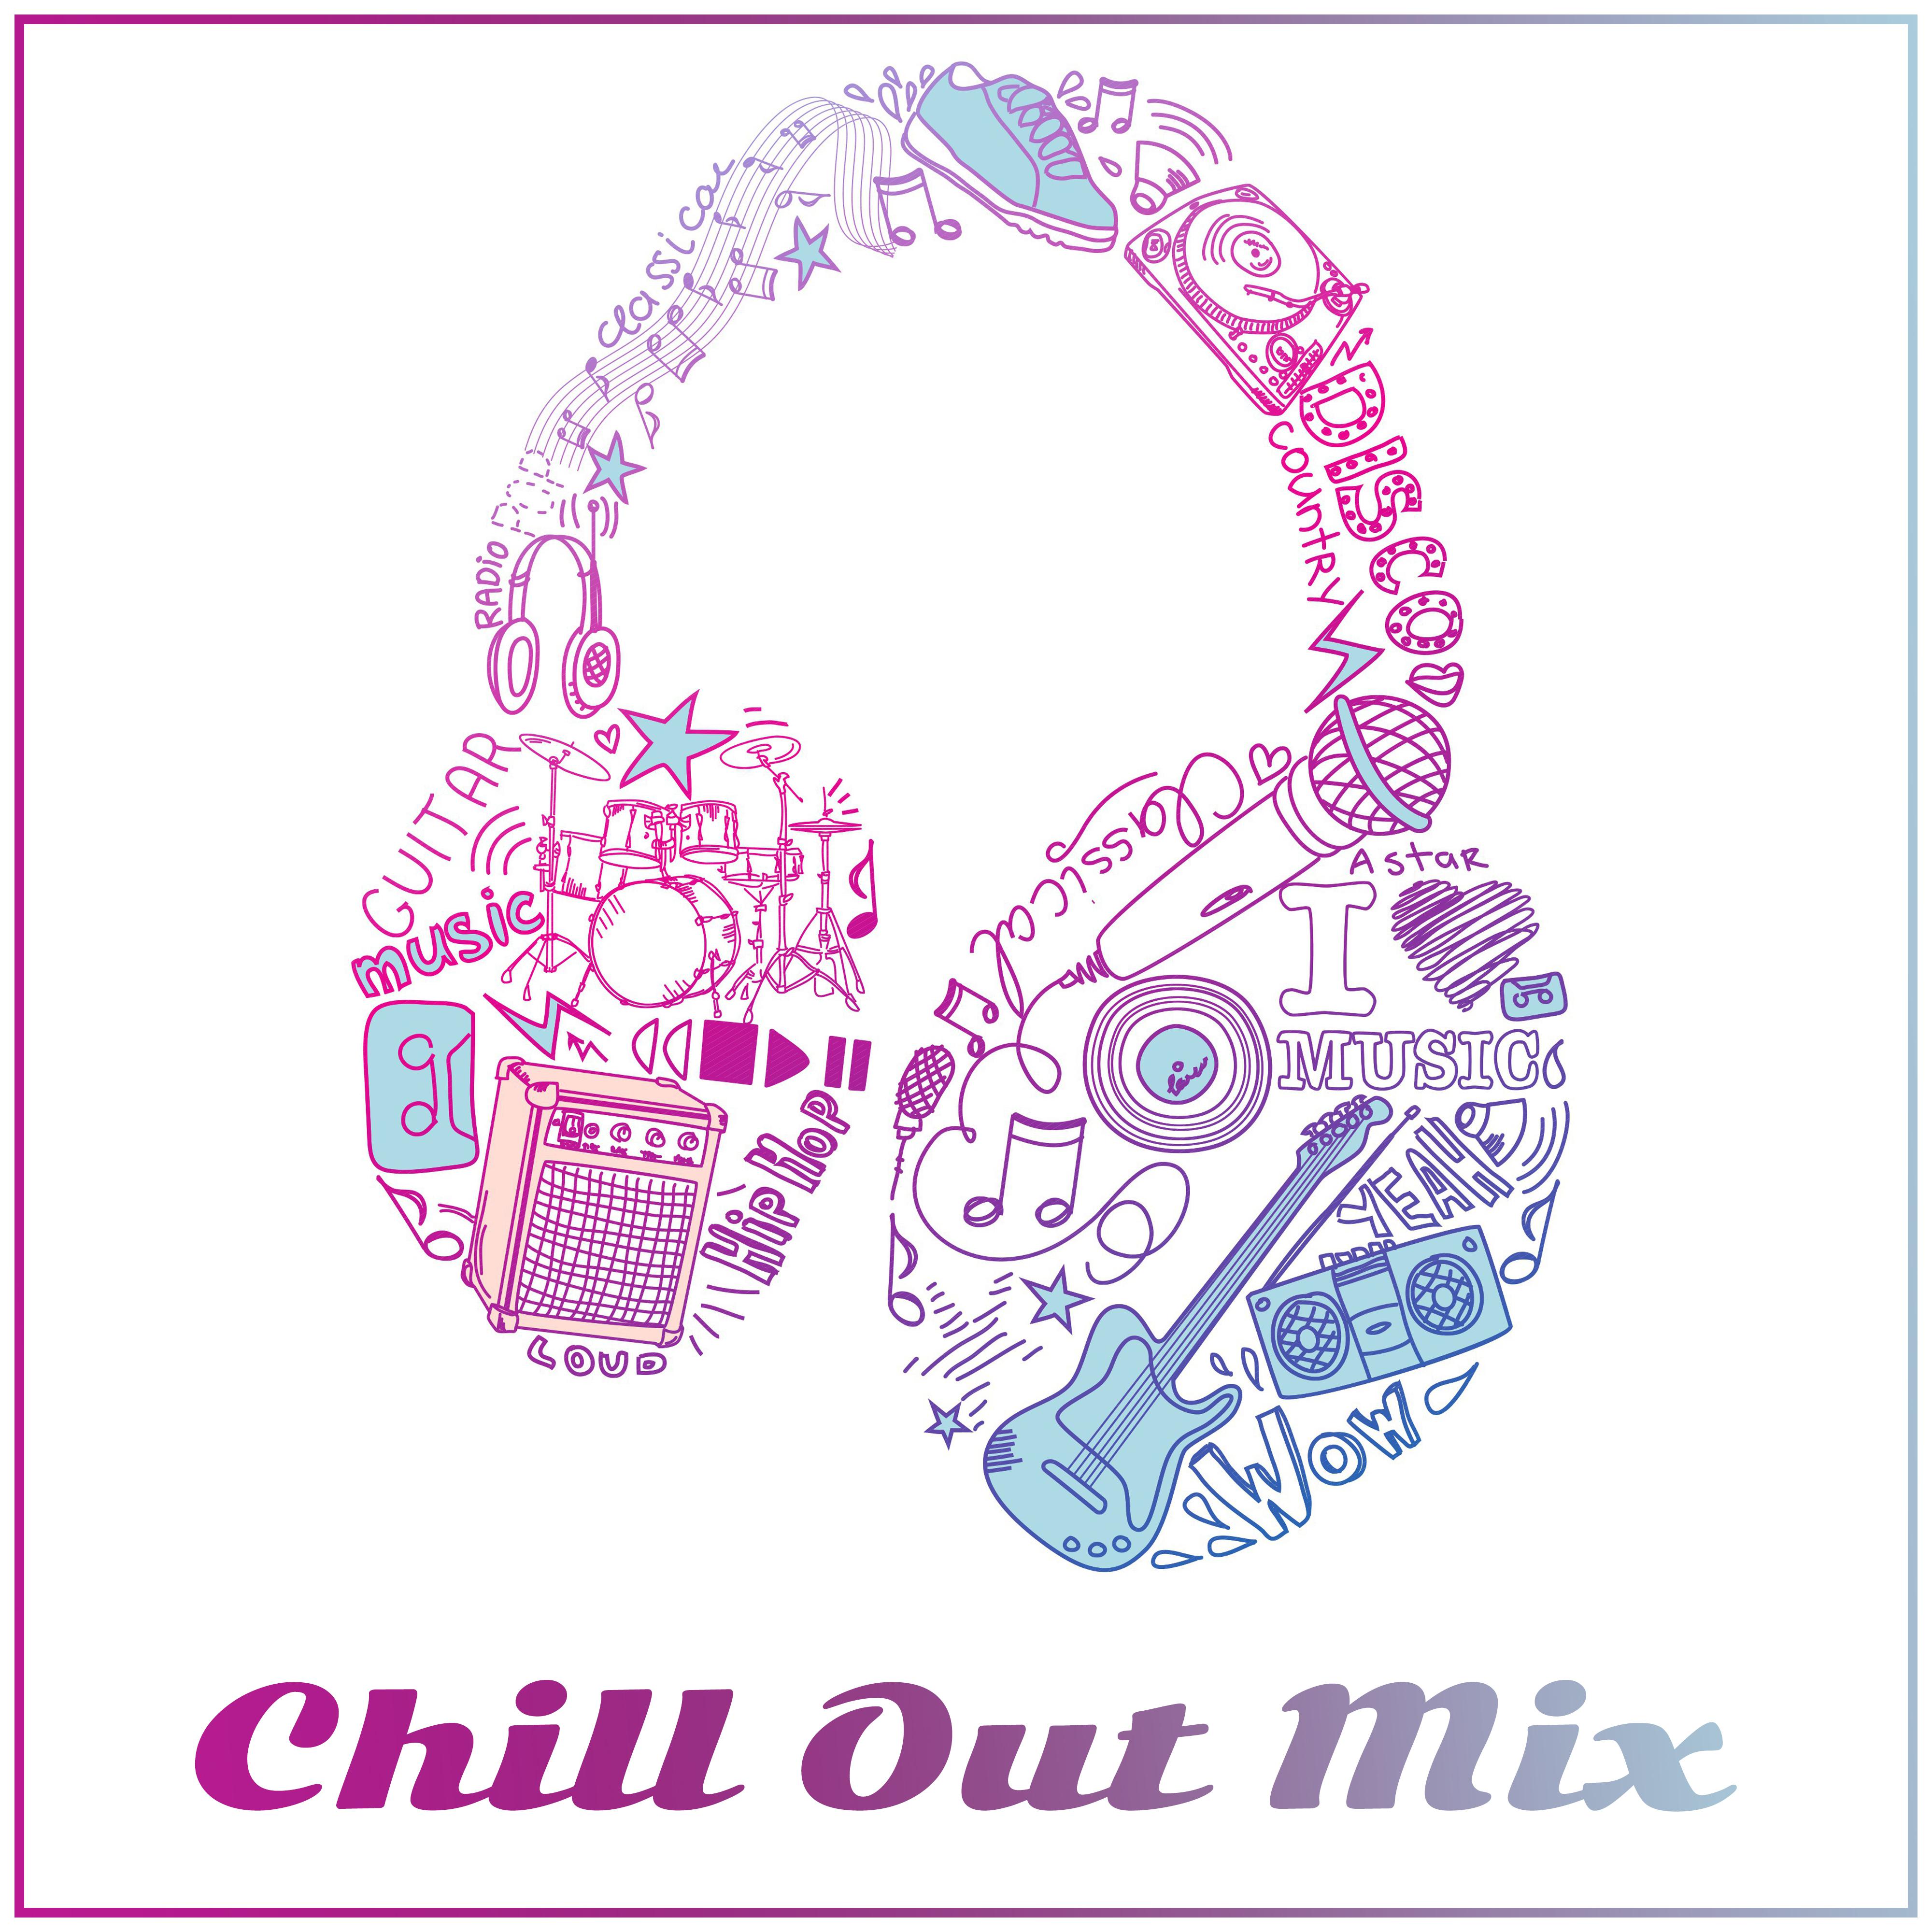 Chill Out Mix – Relaxing Music, Summer Chill, Mellow Chillout, Beach Party, Ambient Music, Asian Chill, Barcelona Chill Out